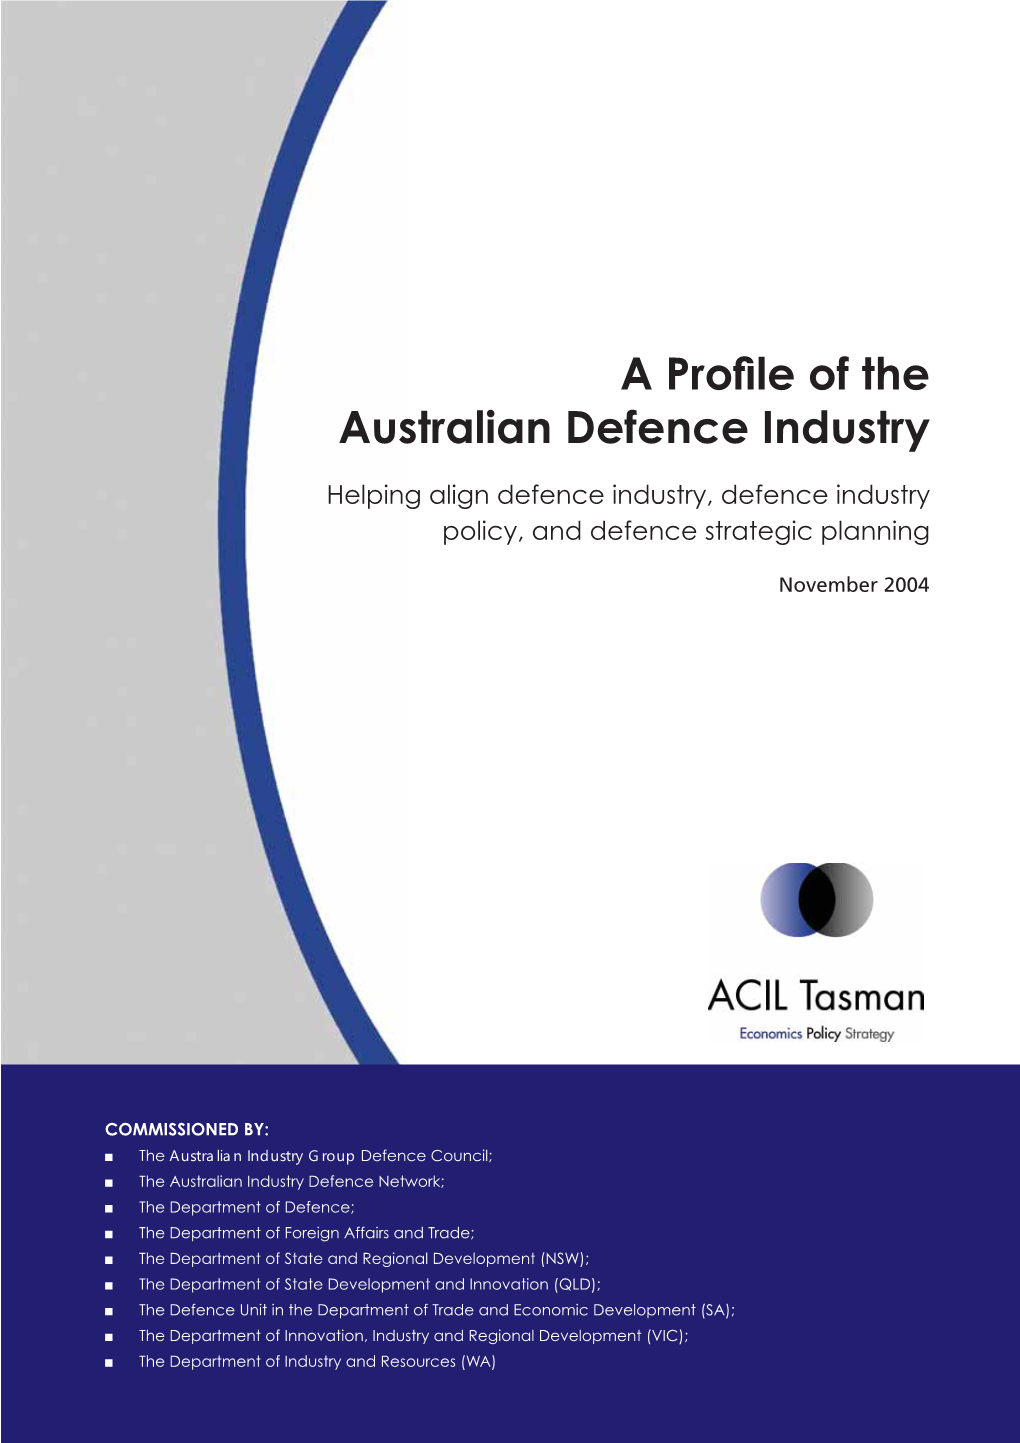 A Profile of the Australian Defence Industry